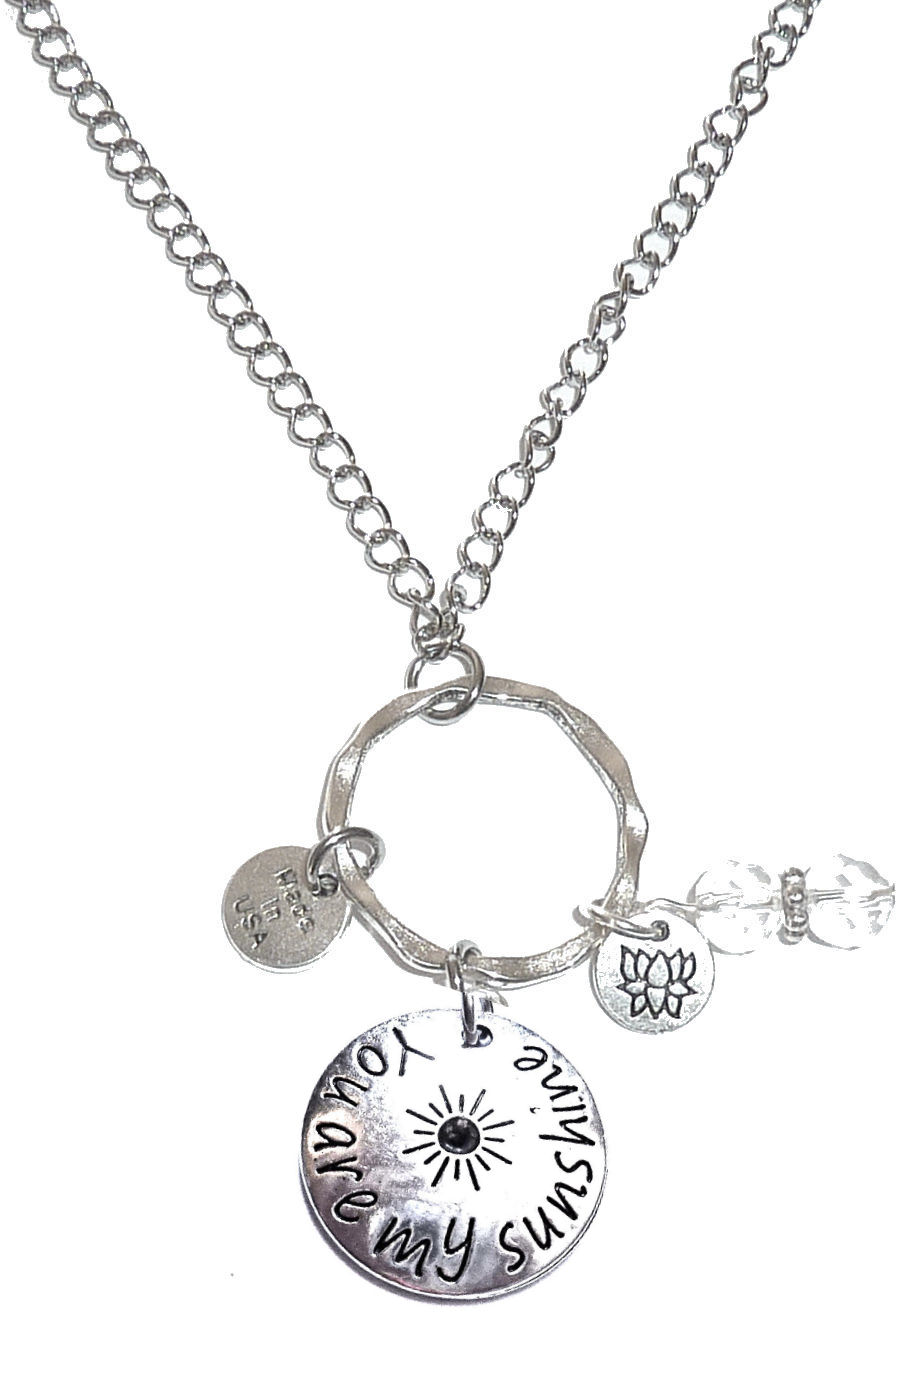 Rearview Mirror Charms - You Are My Sunshine